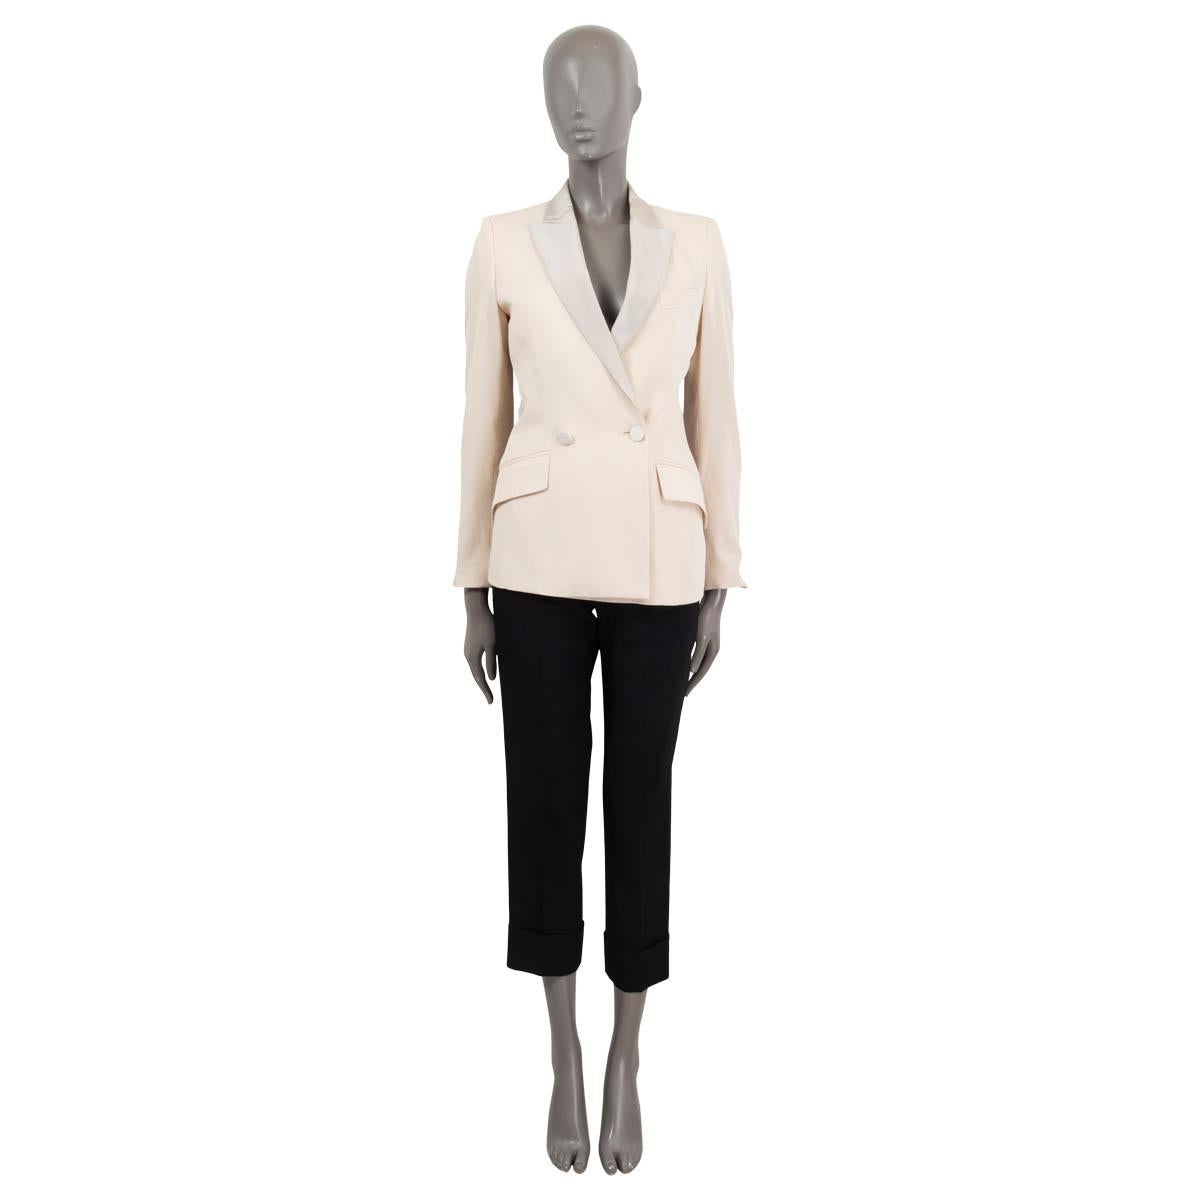 100% authentic Stella McCartney two button grosgrain peak collar blazer in ivory and light grey wool (100%). Features two flap pockets on the front and one chest pocket. Lined in ivory (100%). Has been worn and is in excellent